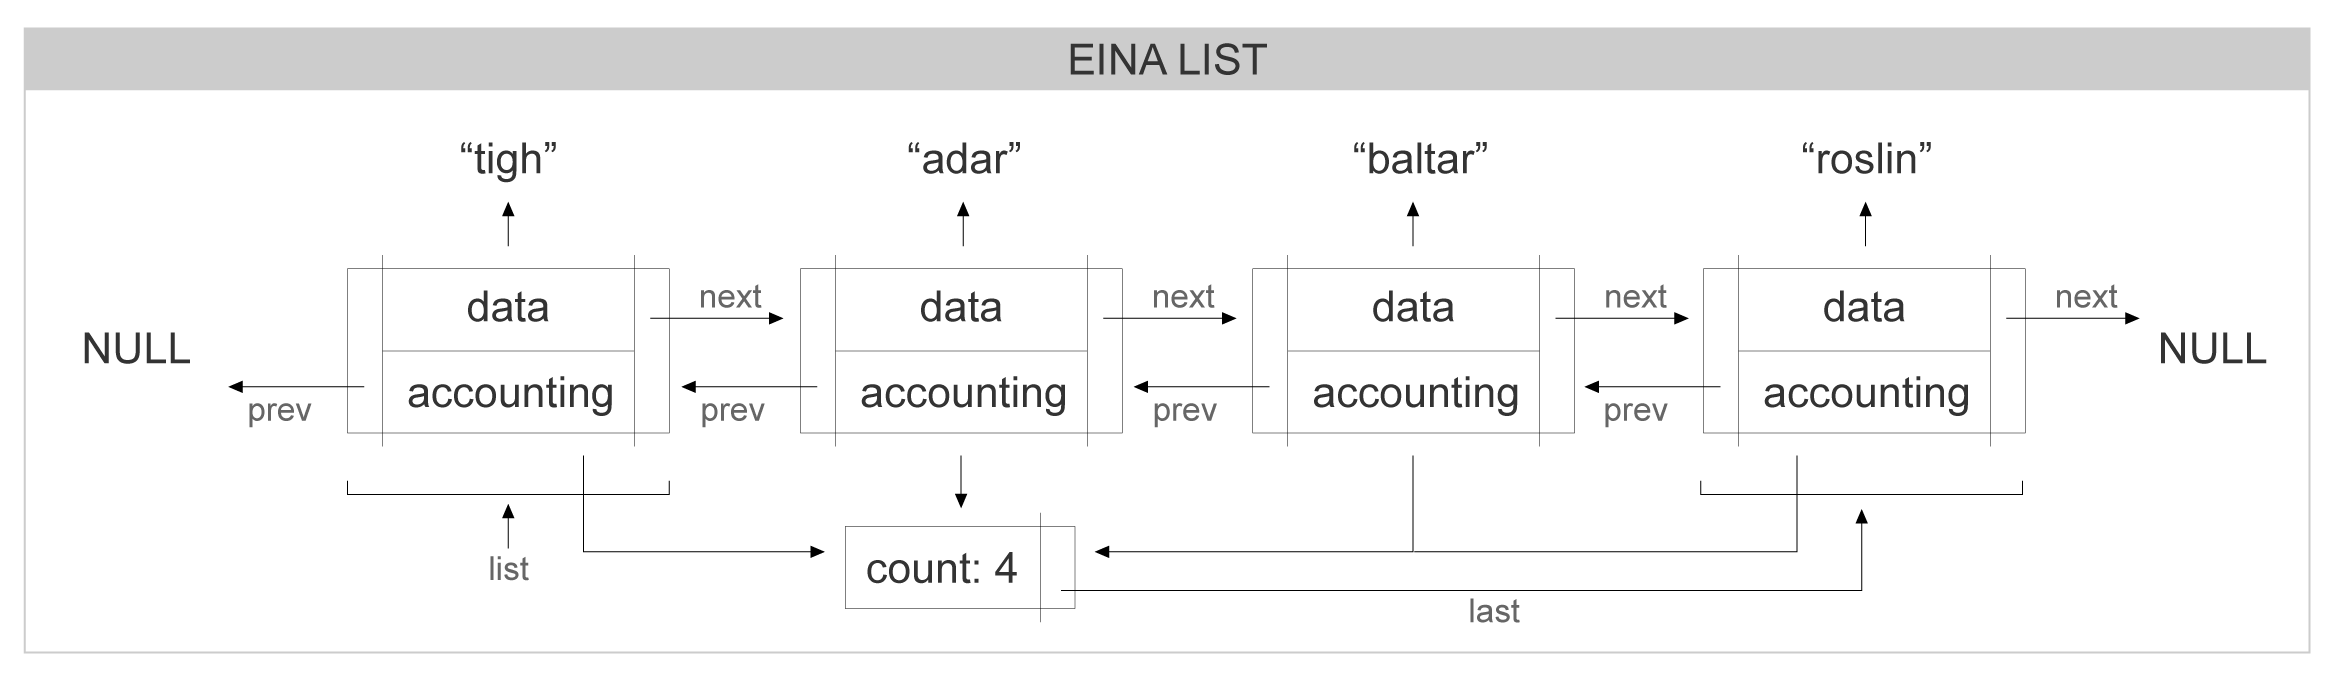 eina_list_example_01_a.png